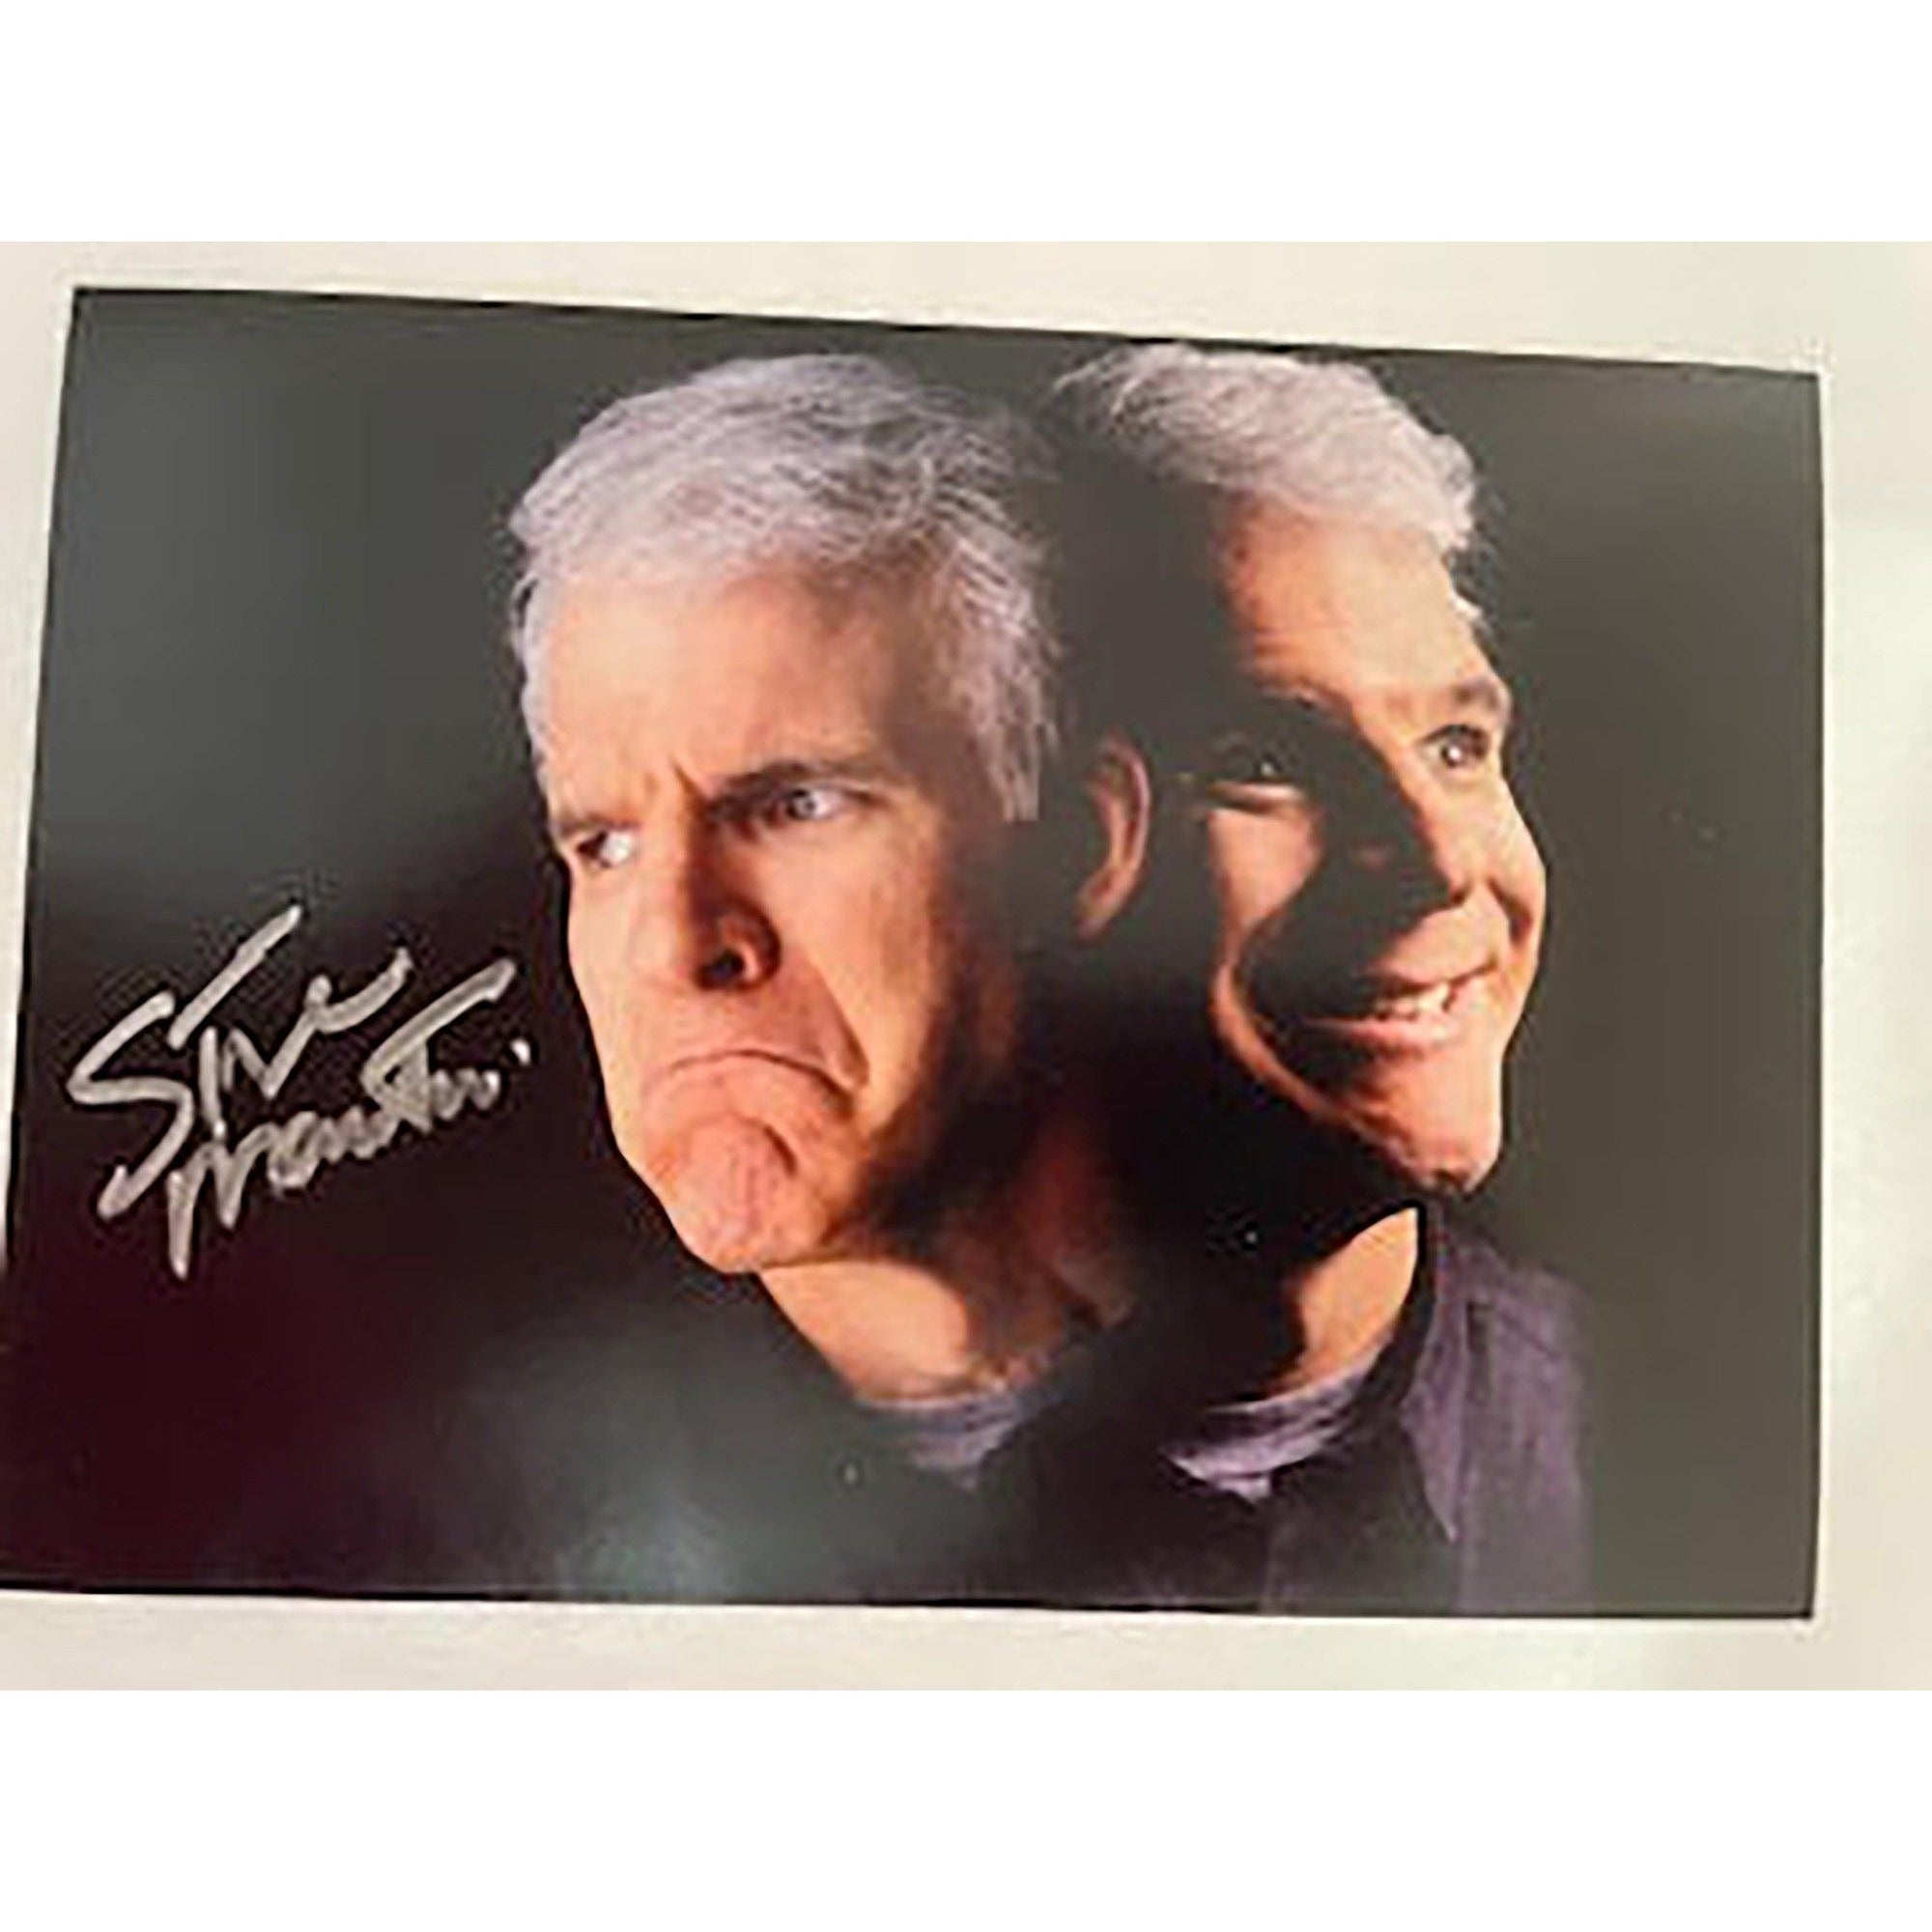 Steve Martin comedian 5 x 7 photo signed with proof